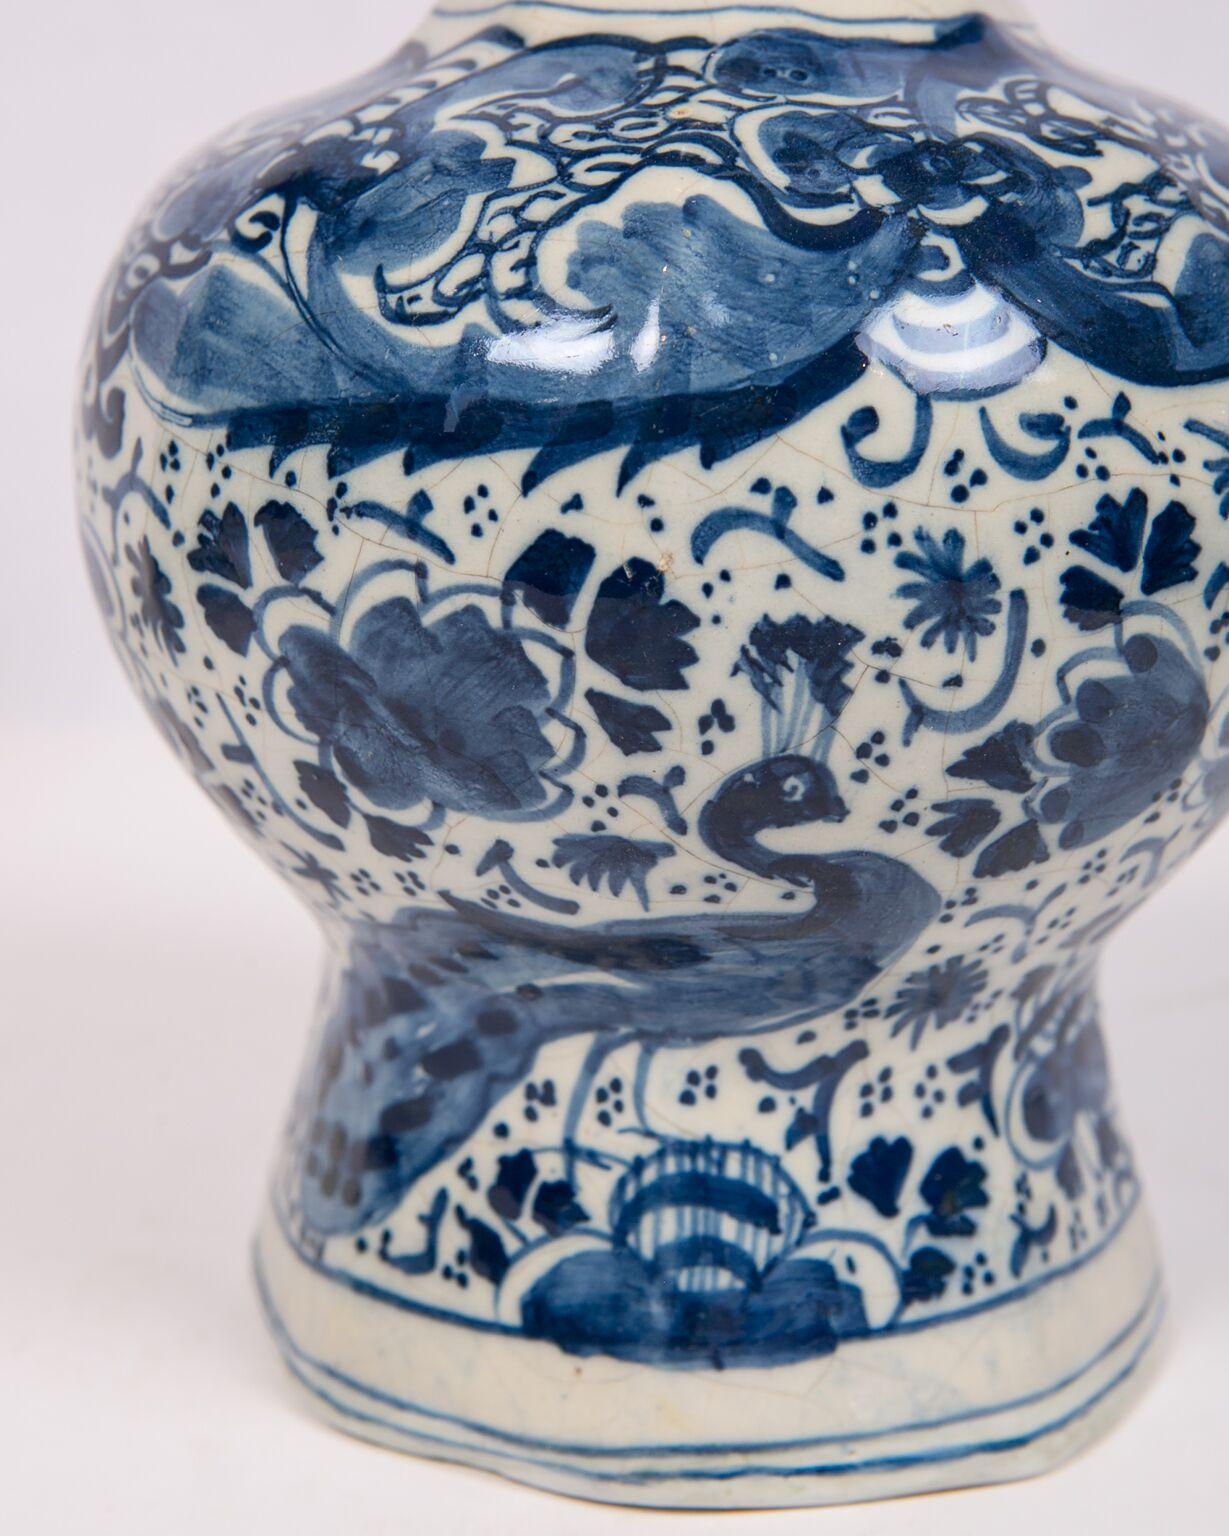 Pair of Blue and White Delft Vases Showing Peacocks and Flowers, 18th Century 2